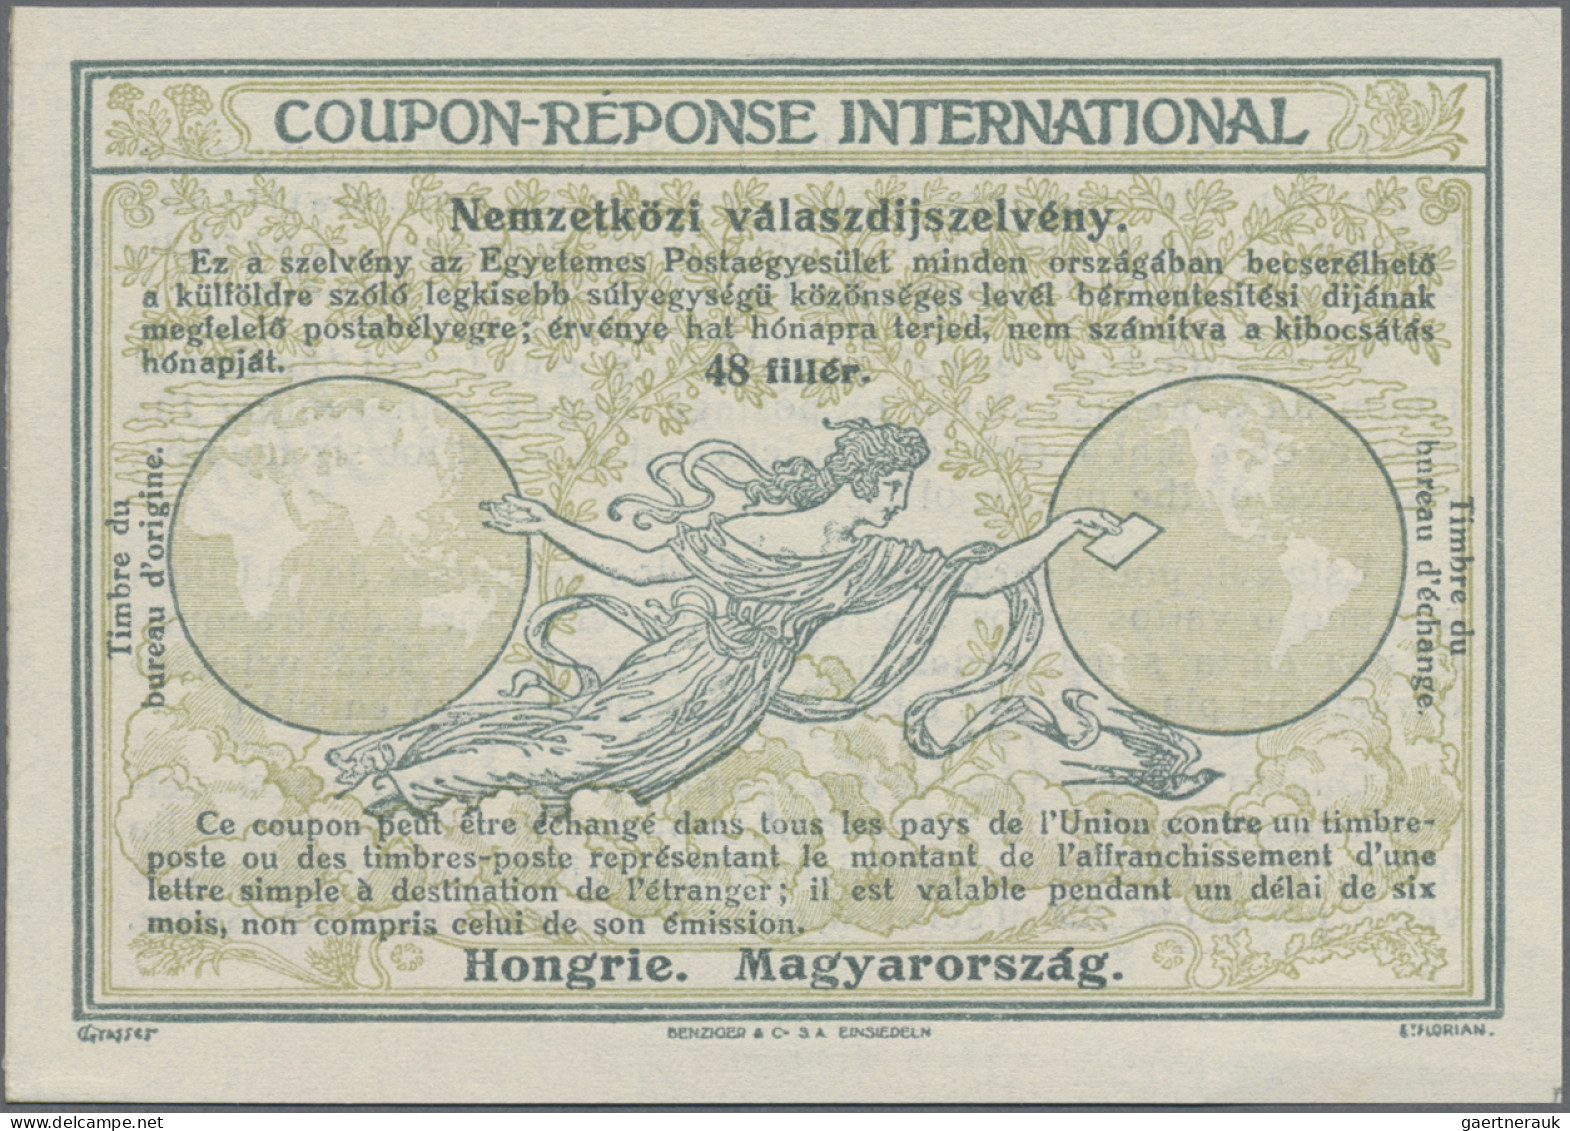 Hungary - Postal Stationary: Intern. Reply Coupon "Rome" 48f., Fine Mint. - Entiers Postaux